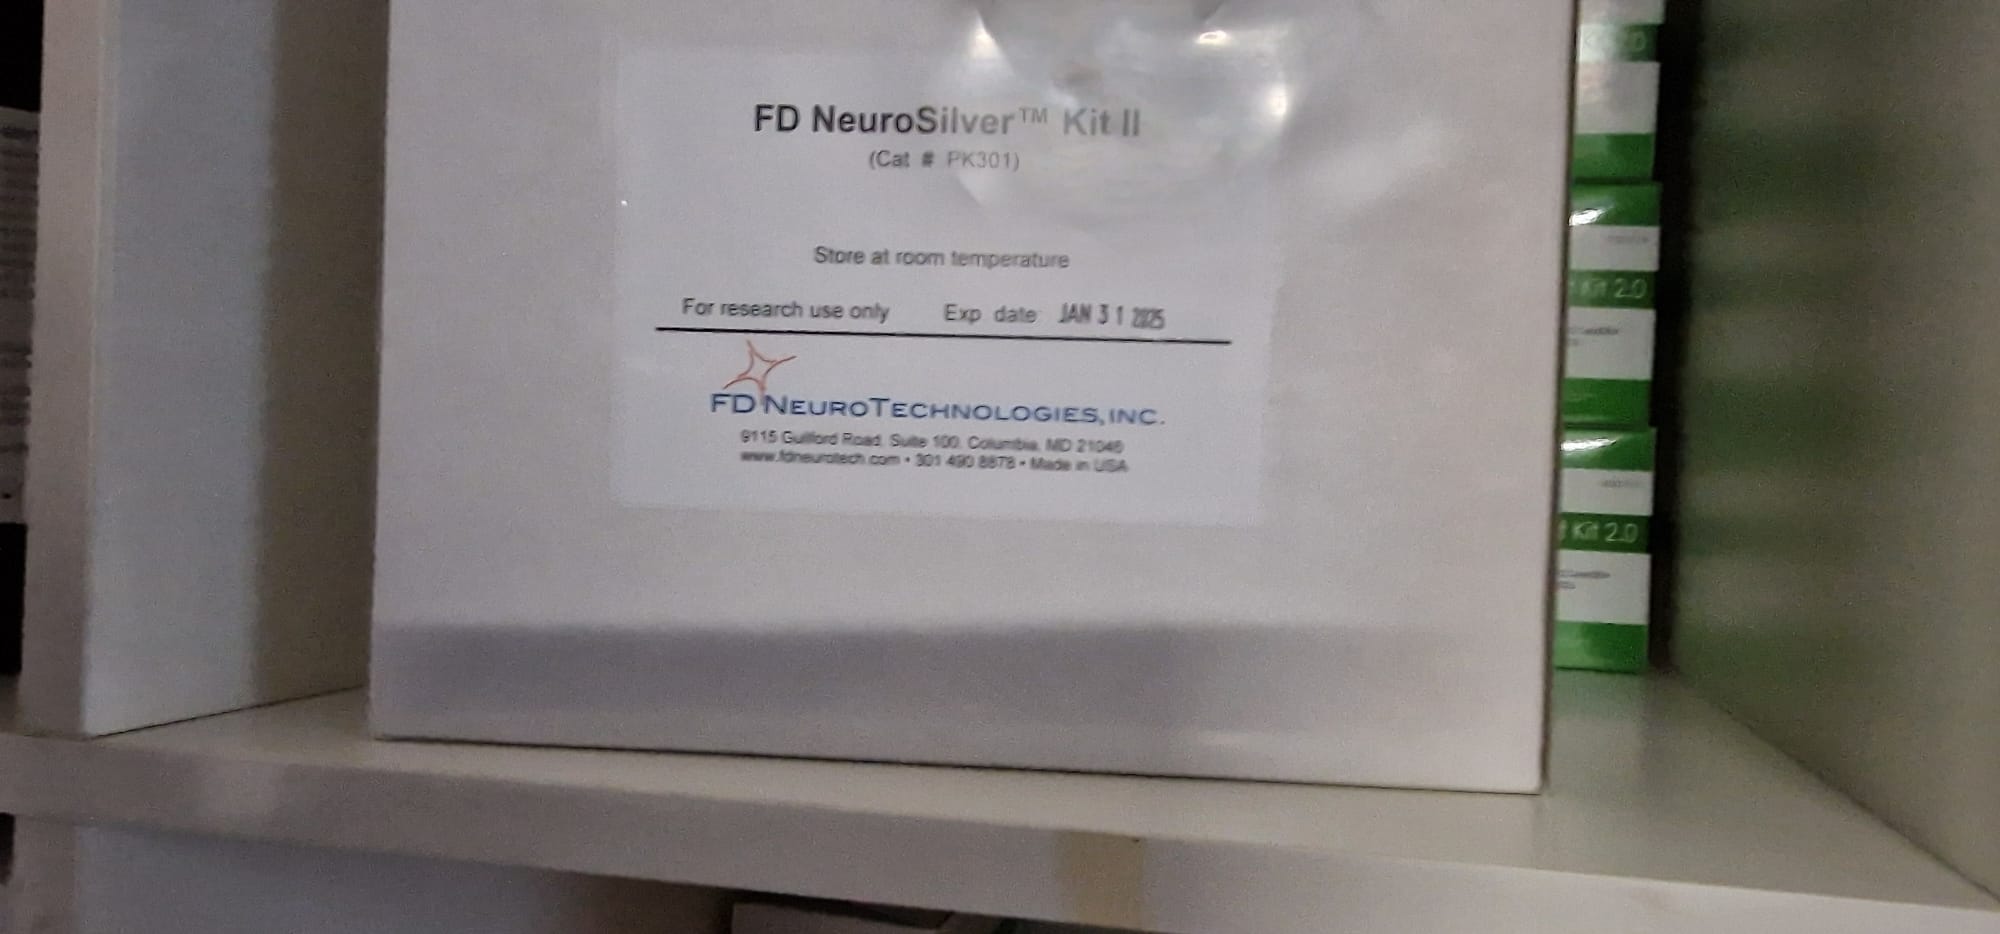 Control Sections for FD NeuroSilver™ Kit